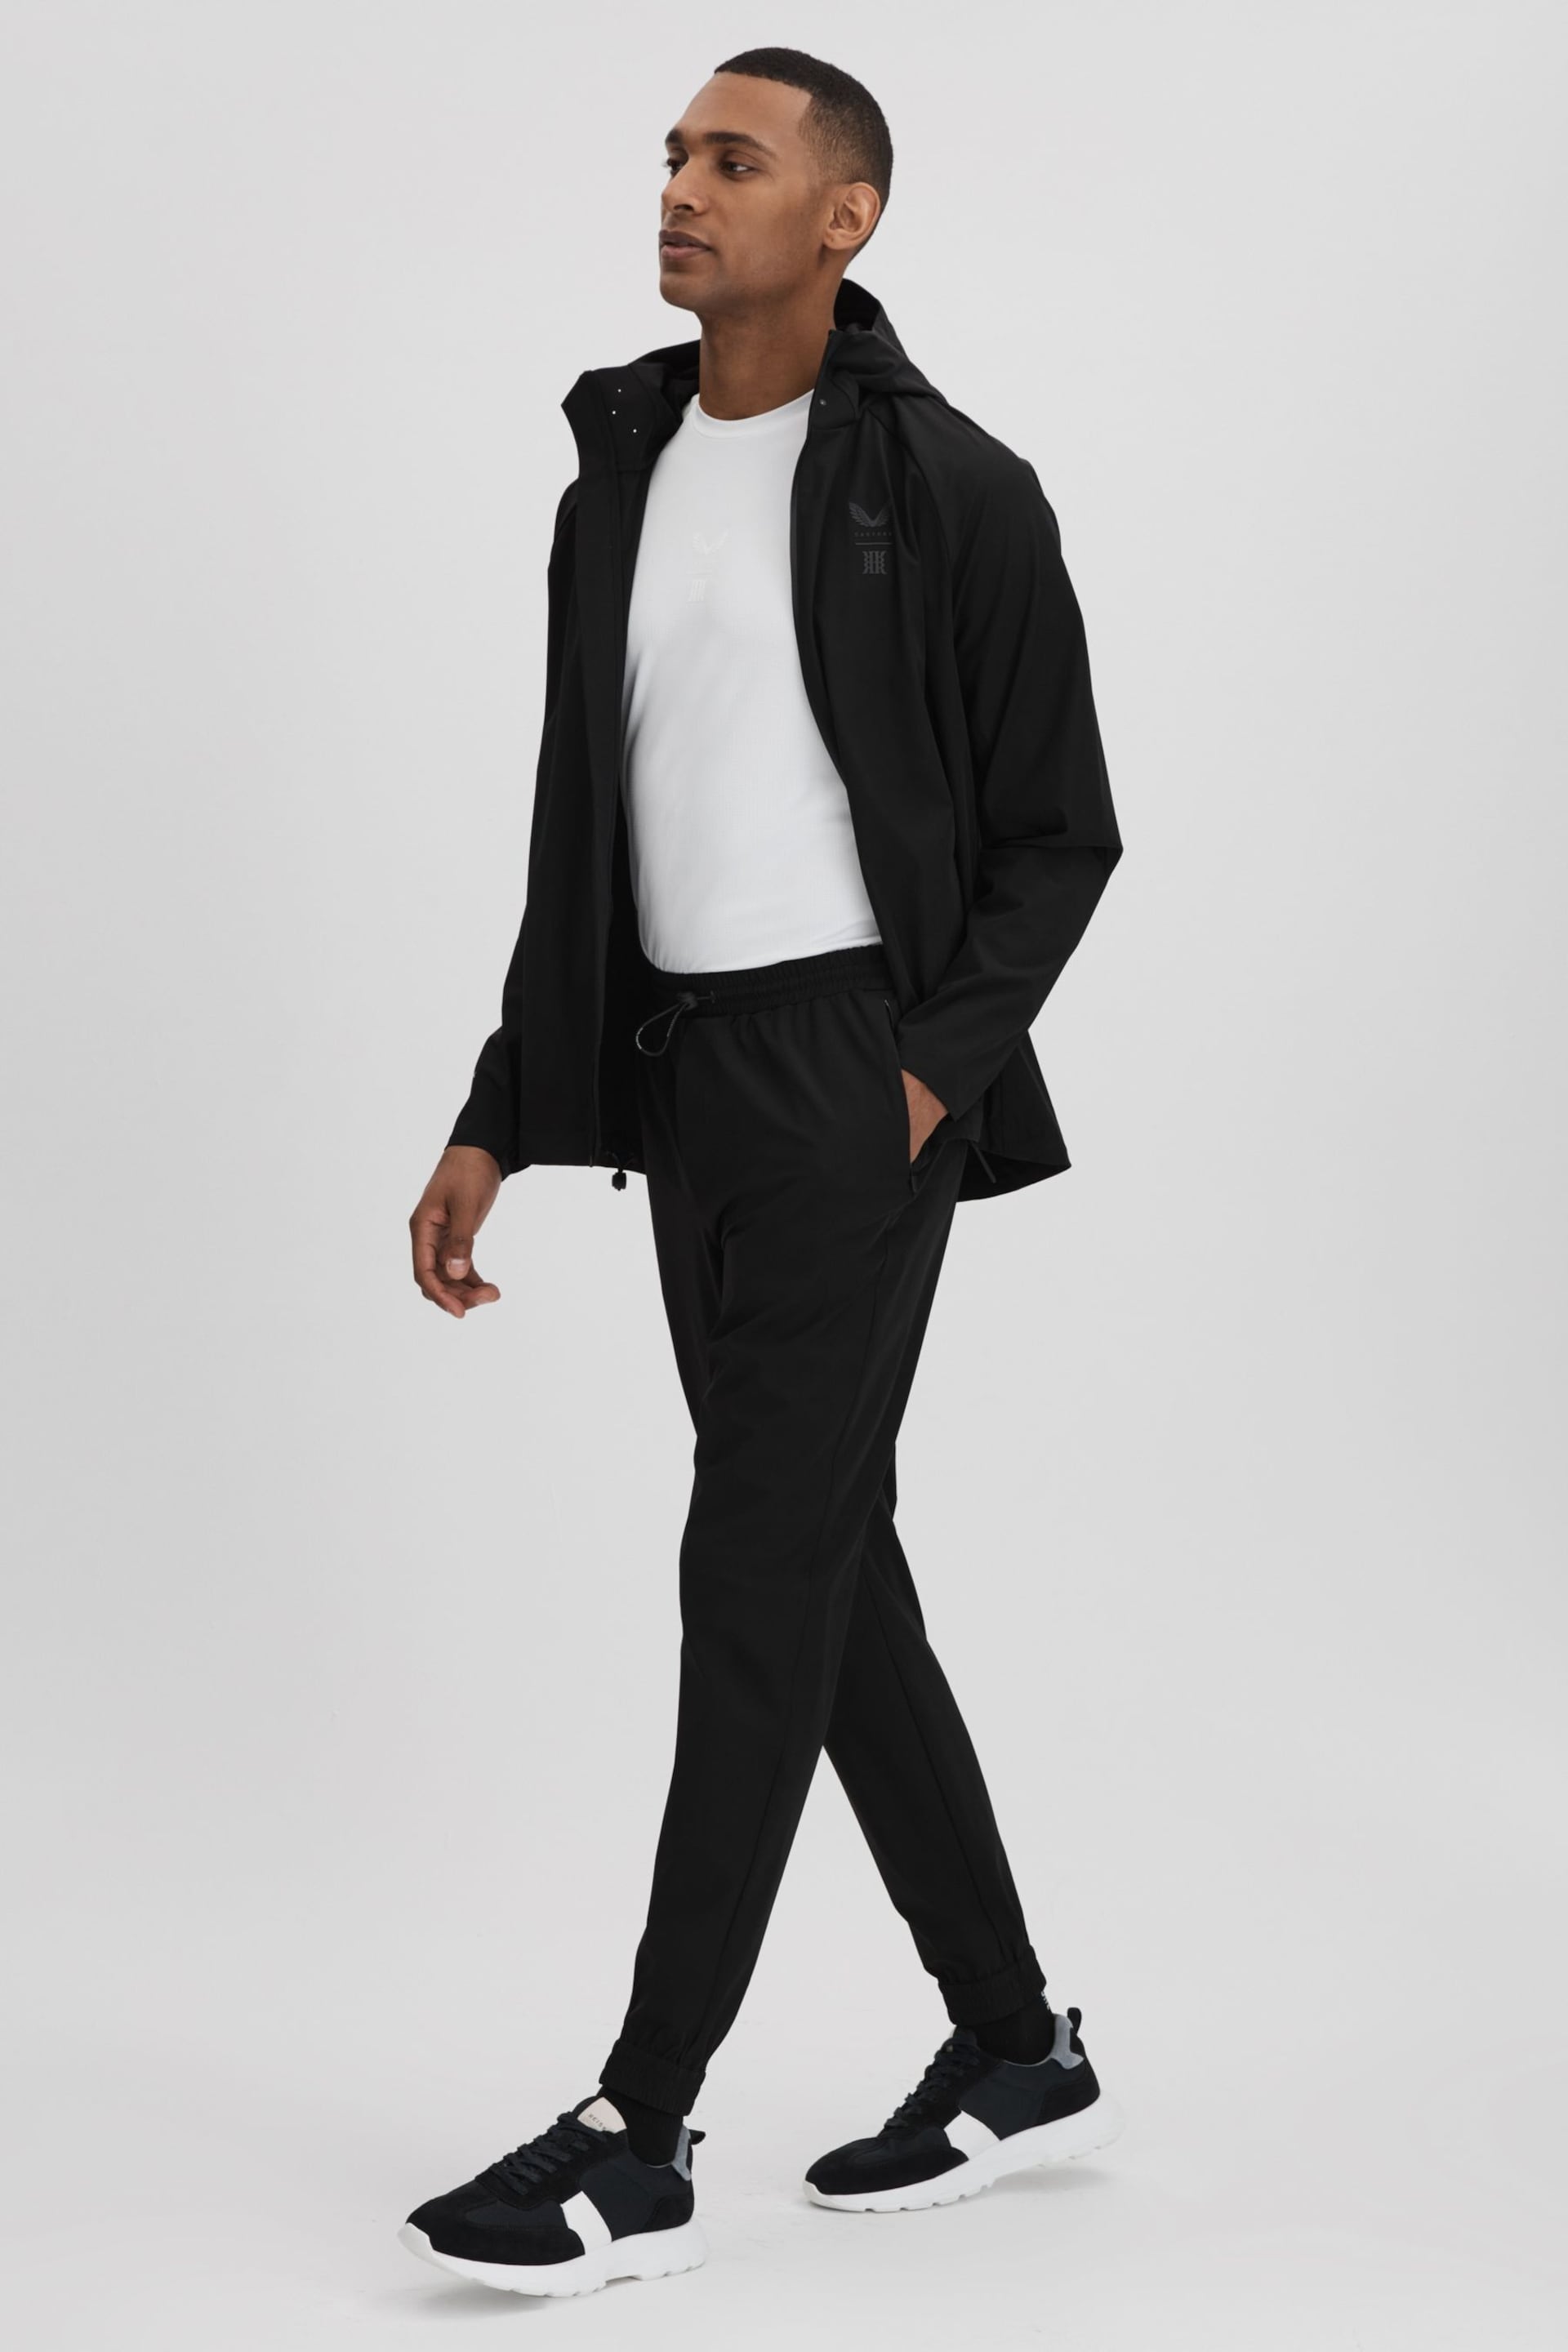 Reiss Onyx Black Dax Castore Water Repellent Track Pants - Image 3 of 8